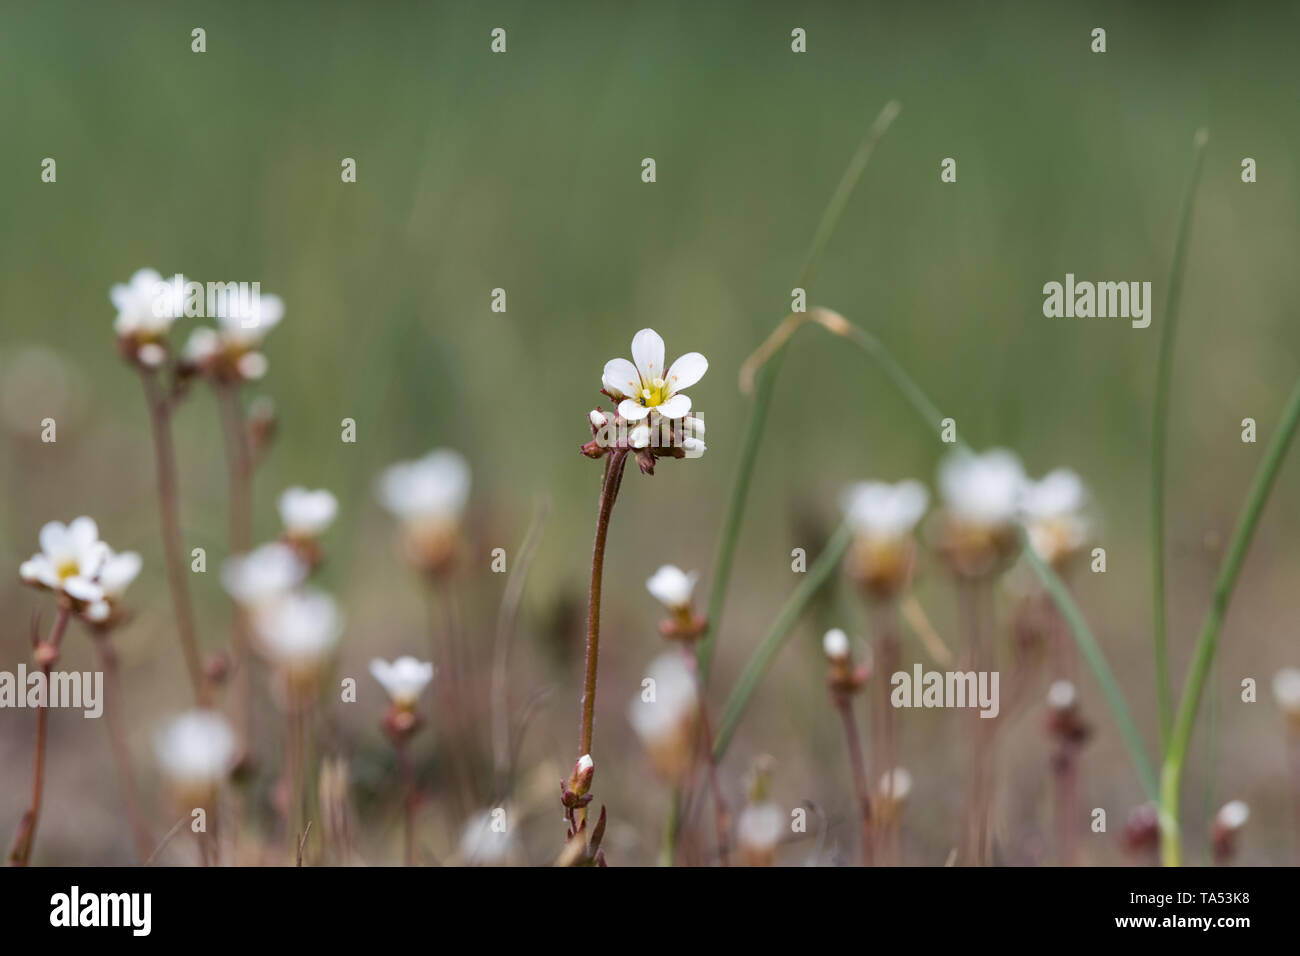 Saxifrage flower closeup in a meadow by a natural blurred background Stock Photo